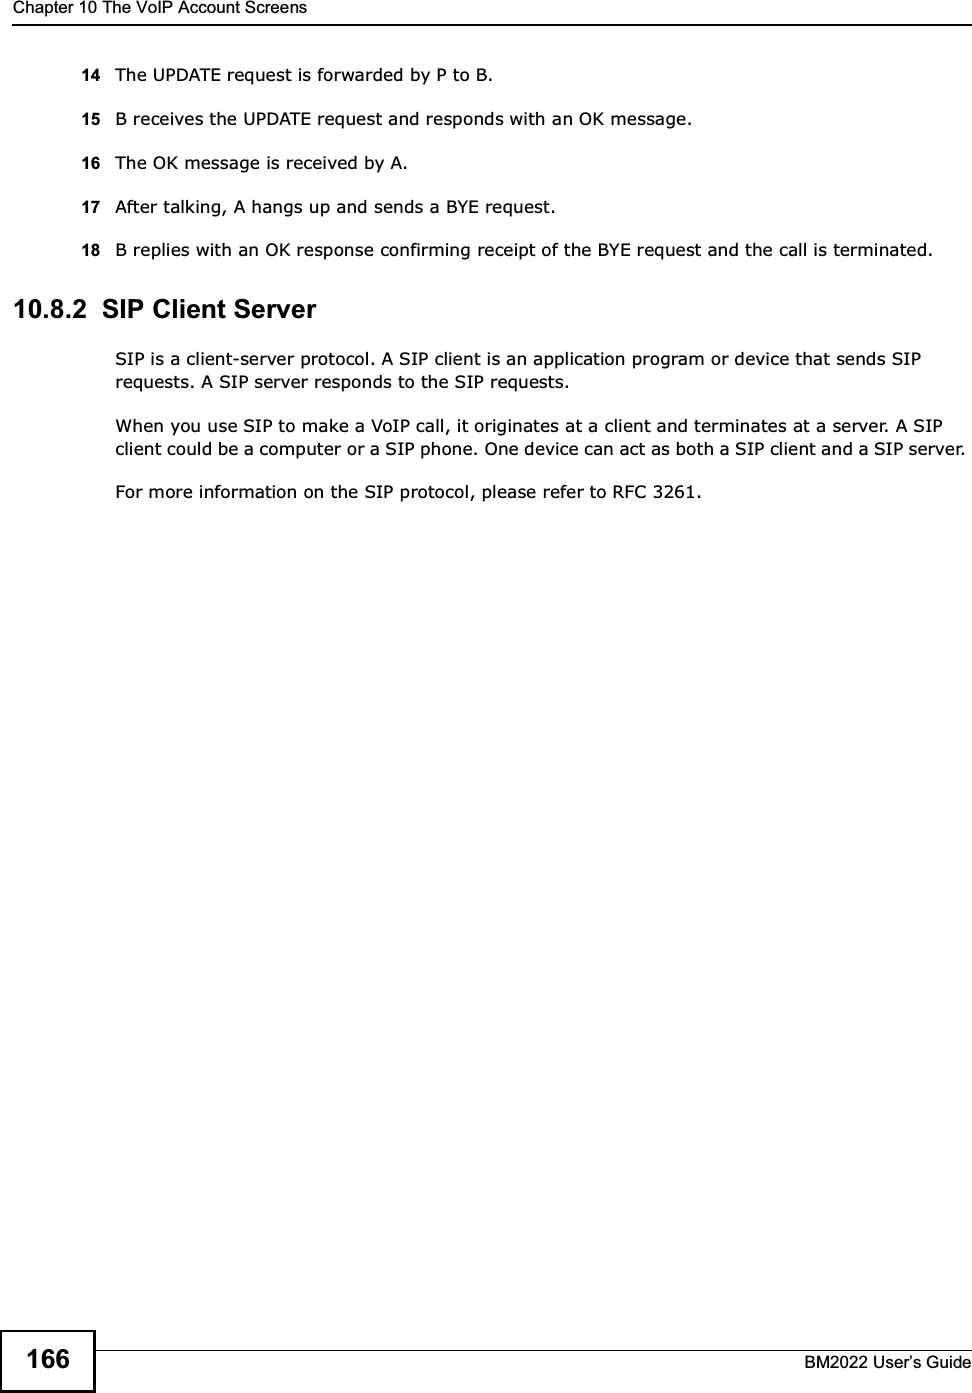 Chapter 10 The VoIP Account ScreensBM2022 Users Guide16614 The UPDATE request is forwarded by P to B.15 B receives the UPDATE request and responds with an OK message.16 The OK message is received by A.17 After talking, A hangs up and sends a BYE request. 18 B replies with an OK response confirming receipt of the BYE request and the call is terminated.10.8.2  SIP Client ServerSIP is a client-server protocol. A SIP client is an application program or device that sends SIP requests. A SIP server responds to the SIP requests. When you use SIP to make a VoIP call, it originates at a client and terminates at a server. A SIP client could be a computer or a SIP phone. One device can act as both a SIP client and a SIP server. For more information on the SIP protocol, please refer to RFC 3261.